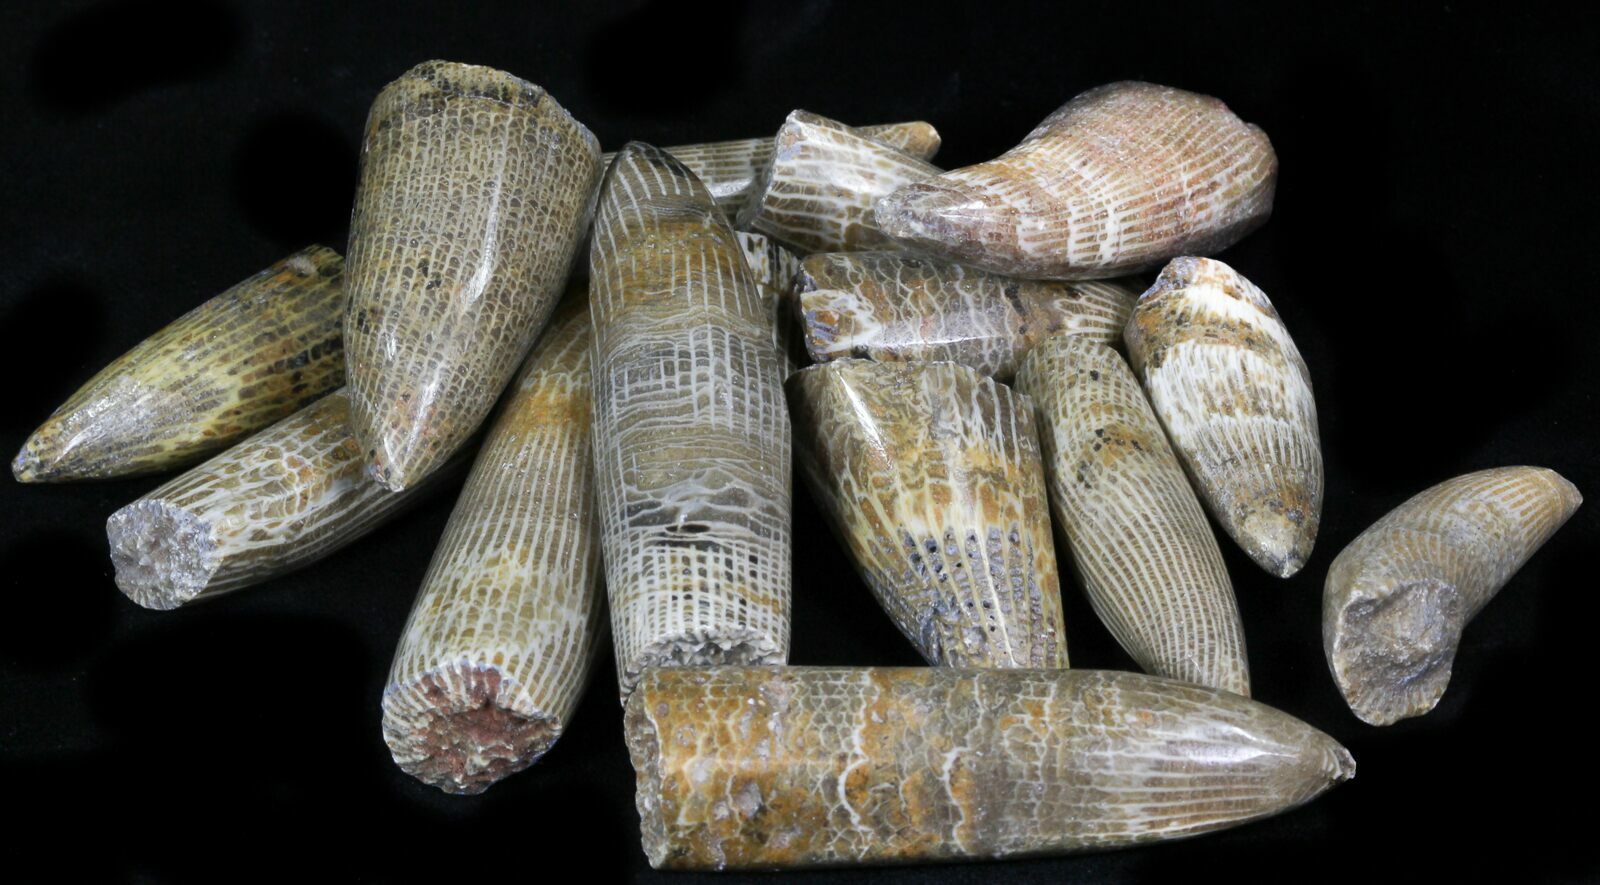 Horn Coral Fossils For Sale - FossilEra.com